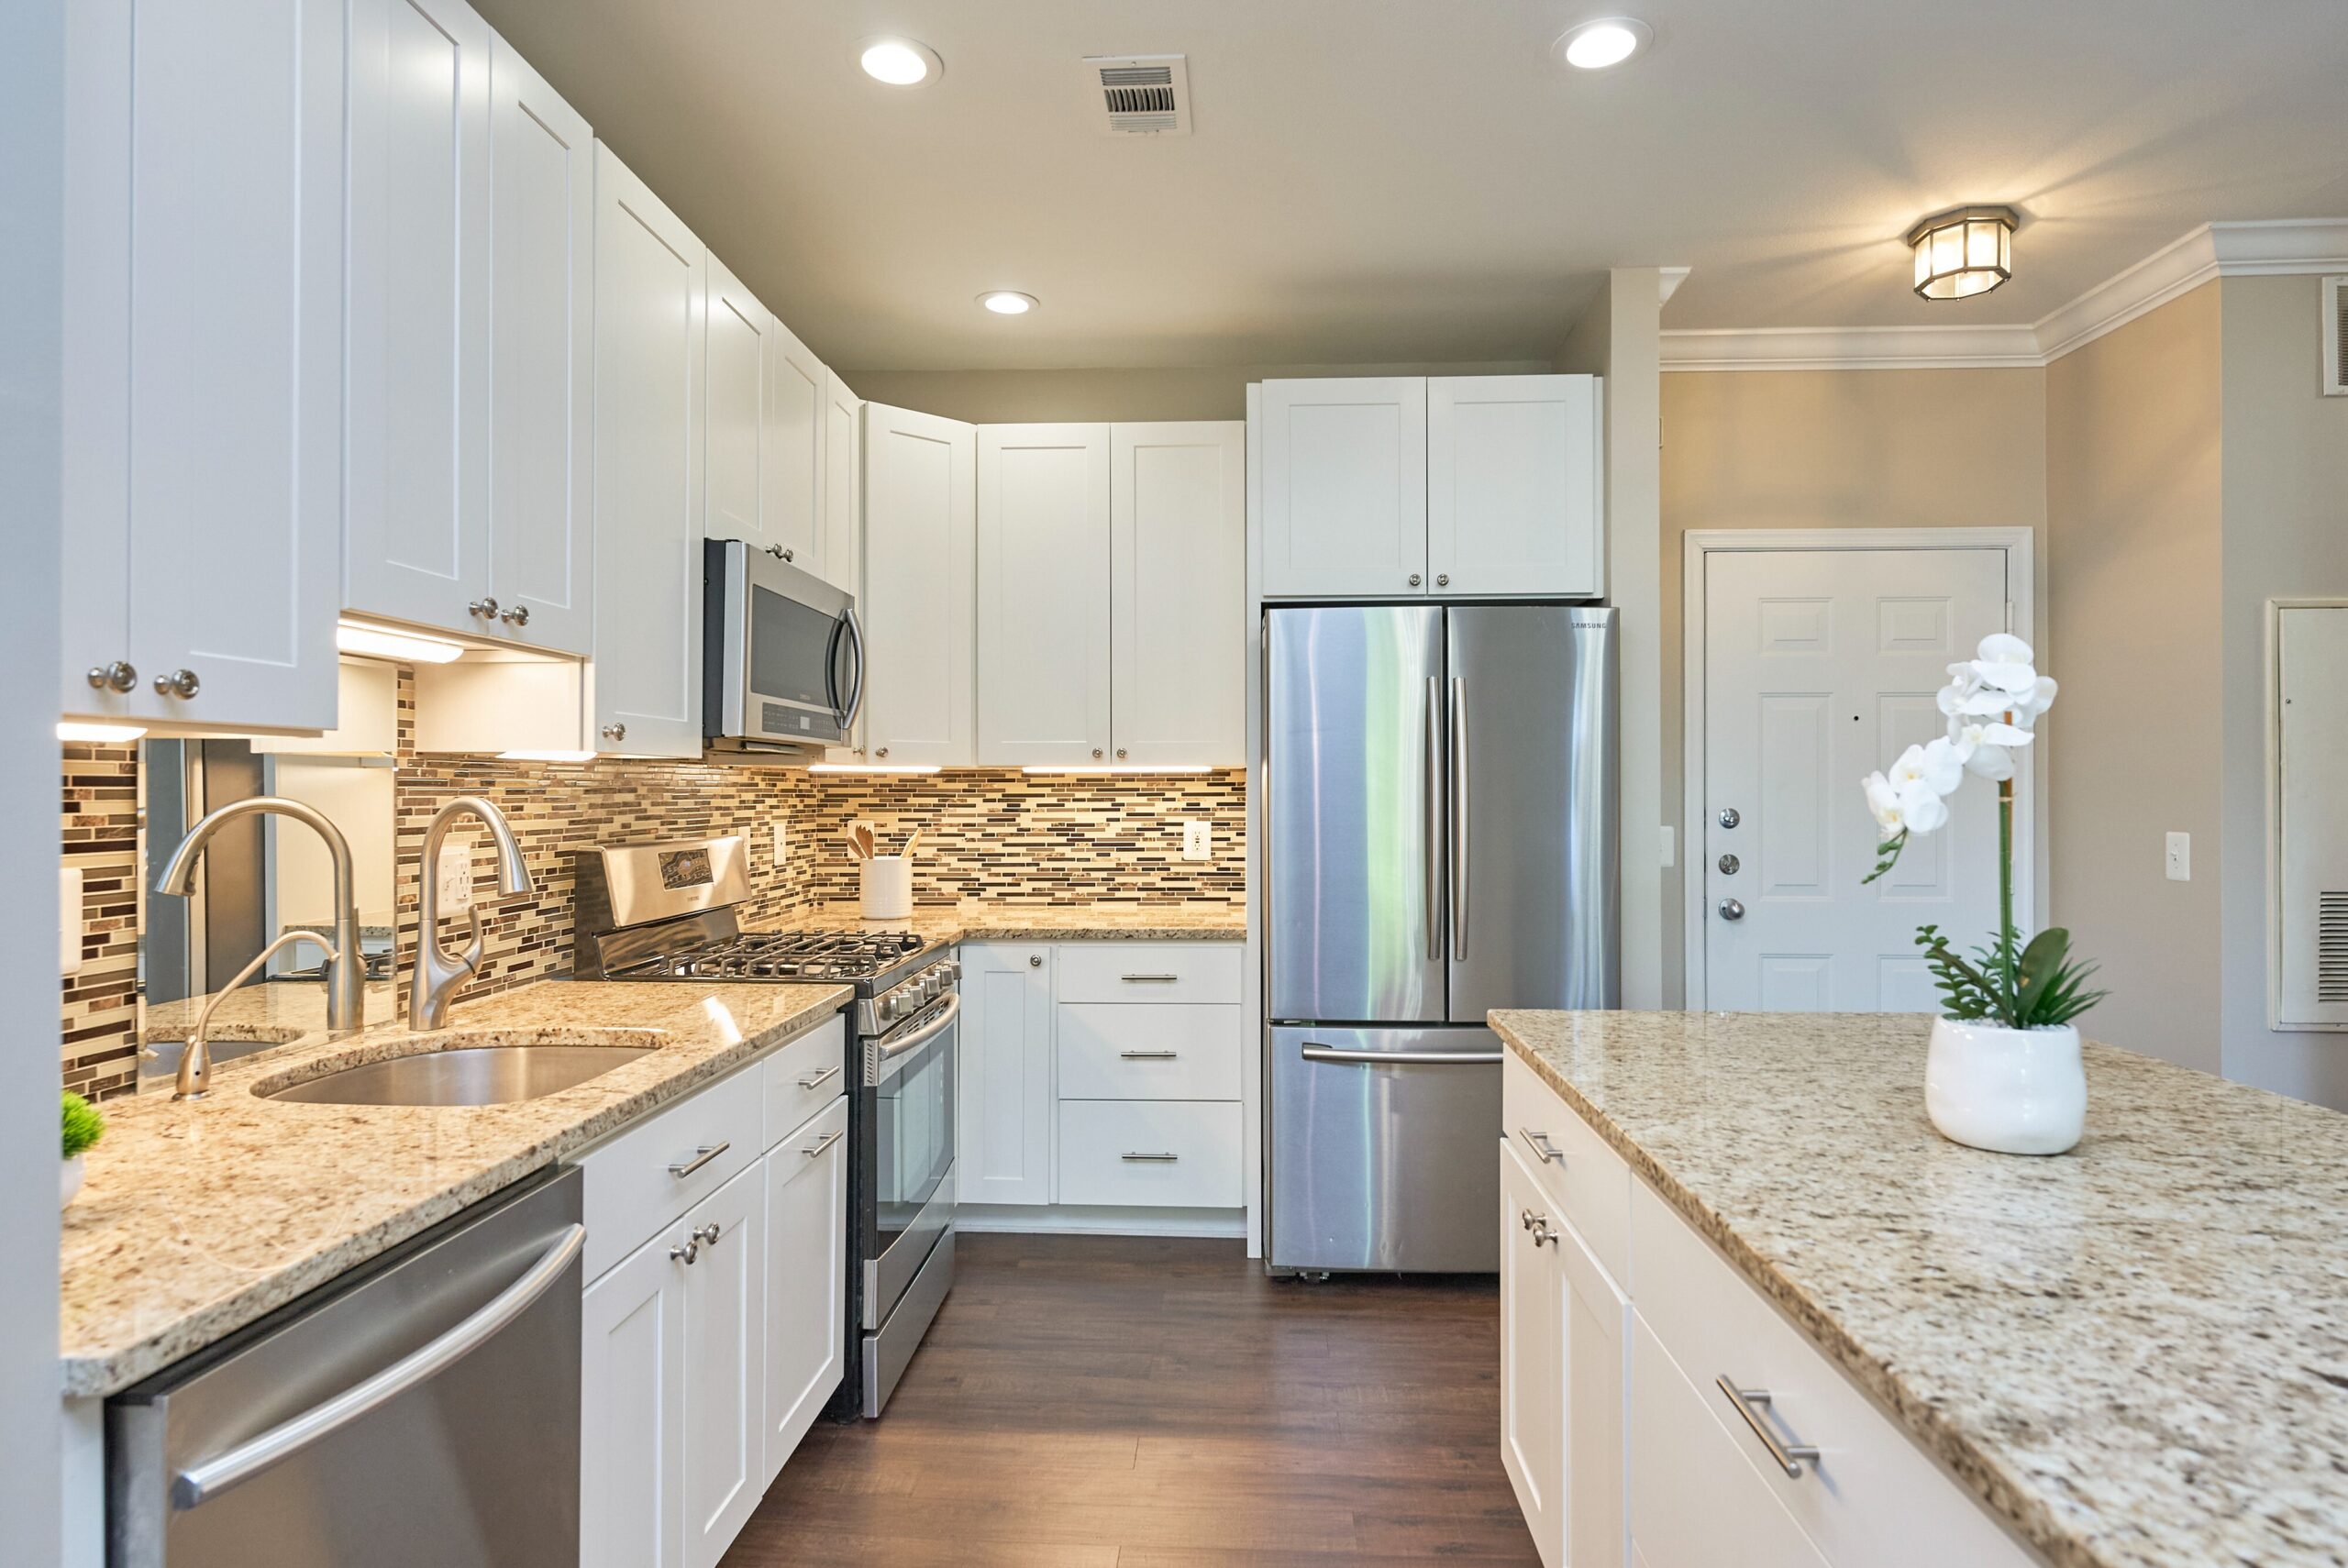 White kitchen with lots of cabinets, upgraded stainless steel appliances, and granite countertops